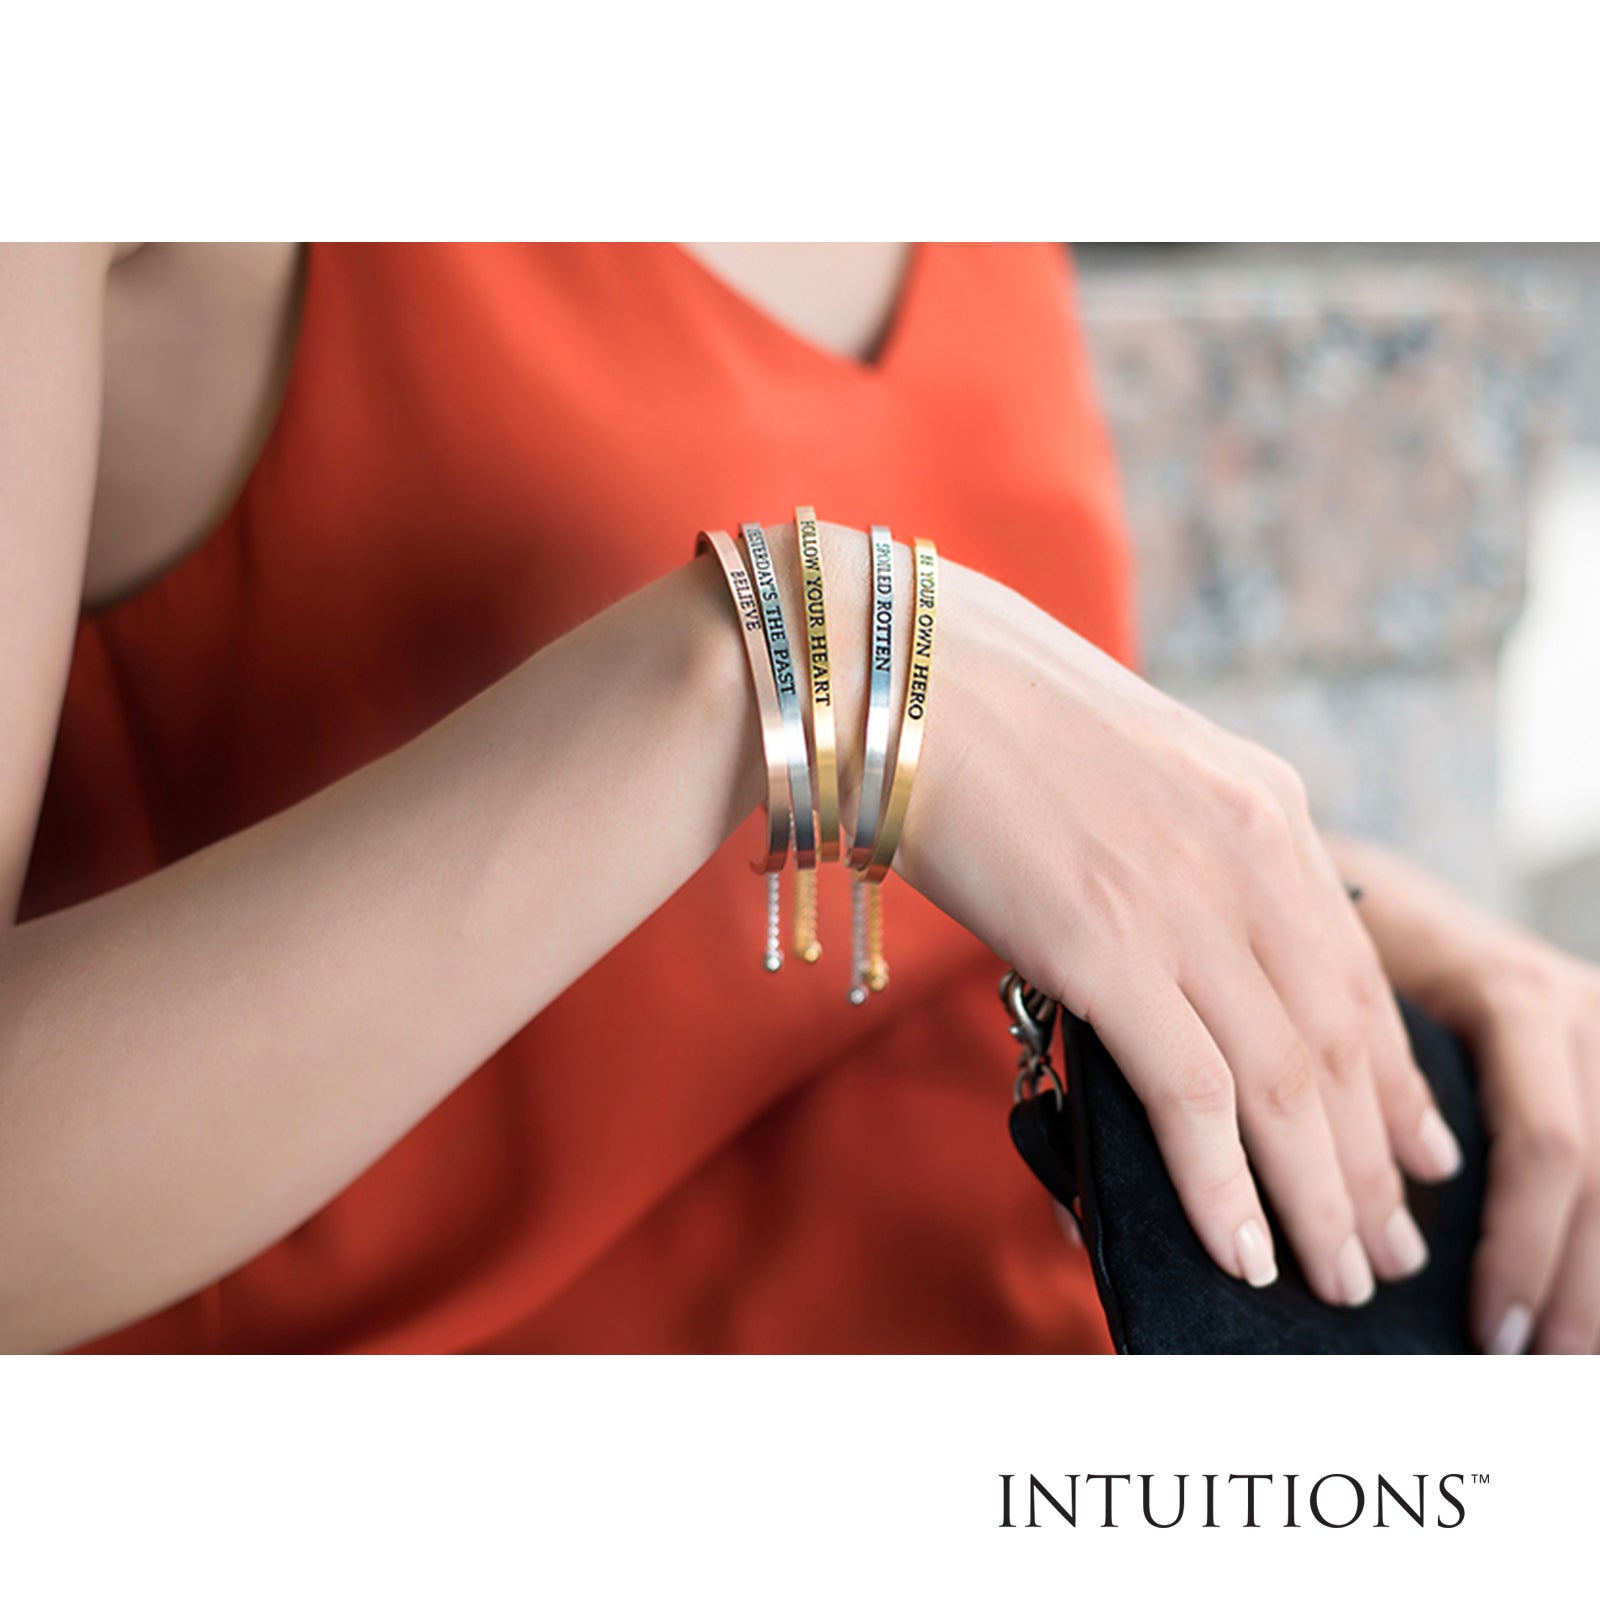 Intuitions Stainless Steel ENJOY THE JOURNEY Diamond Accent Cuff Bangle Bracelet fine designer jewelry for men and women